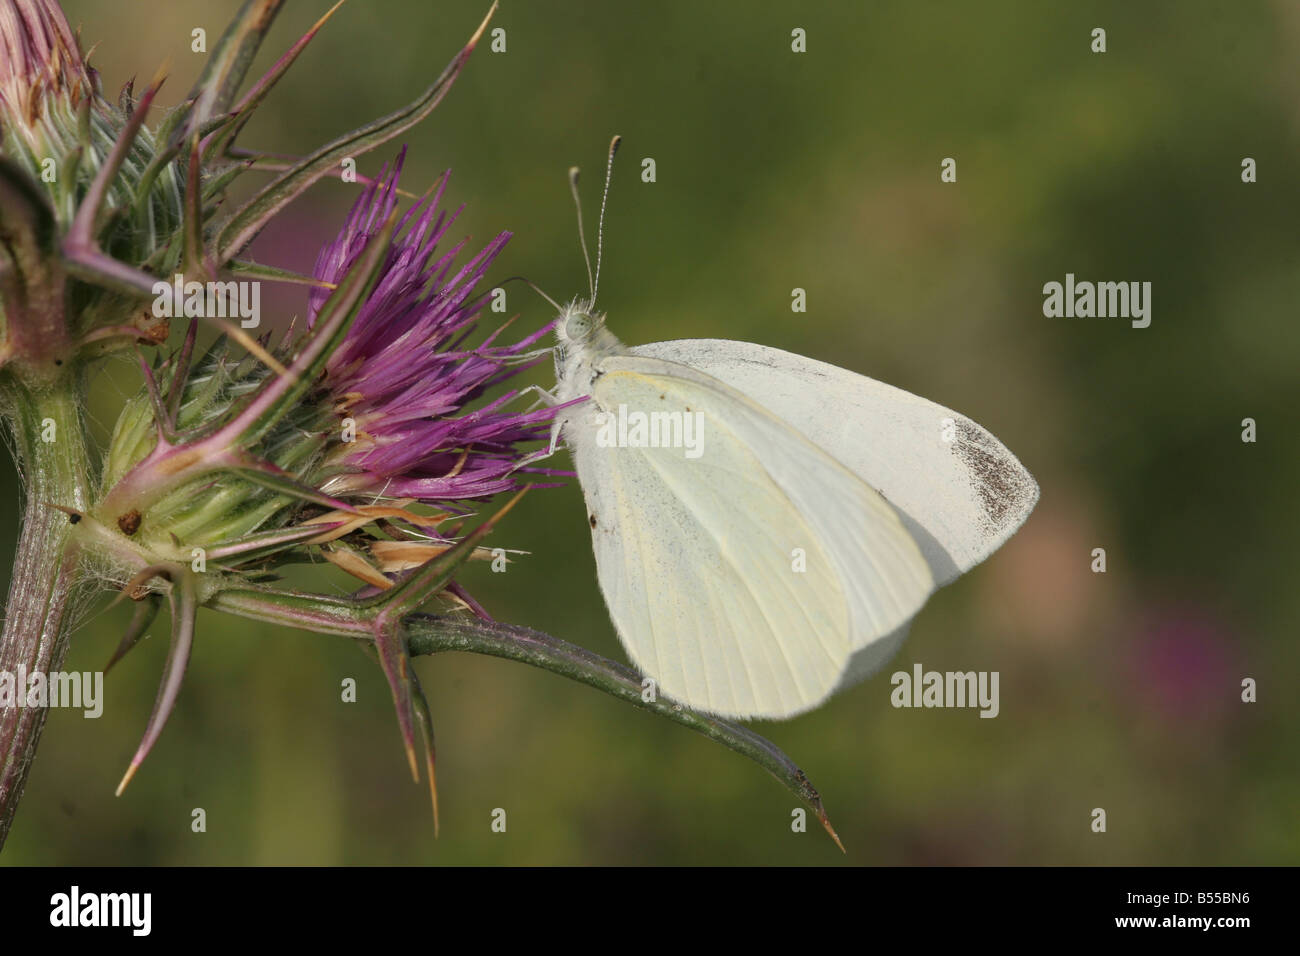 The Large White or Cabbage White Pieris brassicae Butterfly shot in Israel Spring April Stock Photo